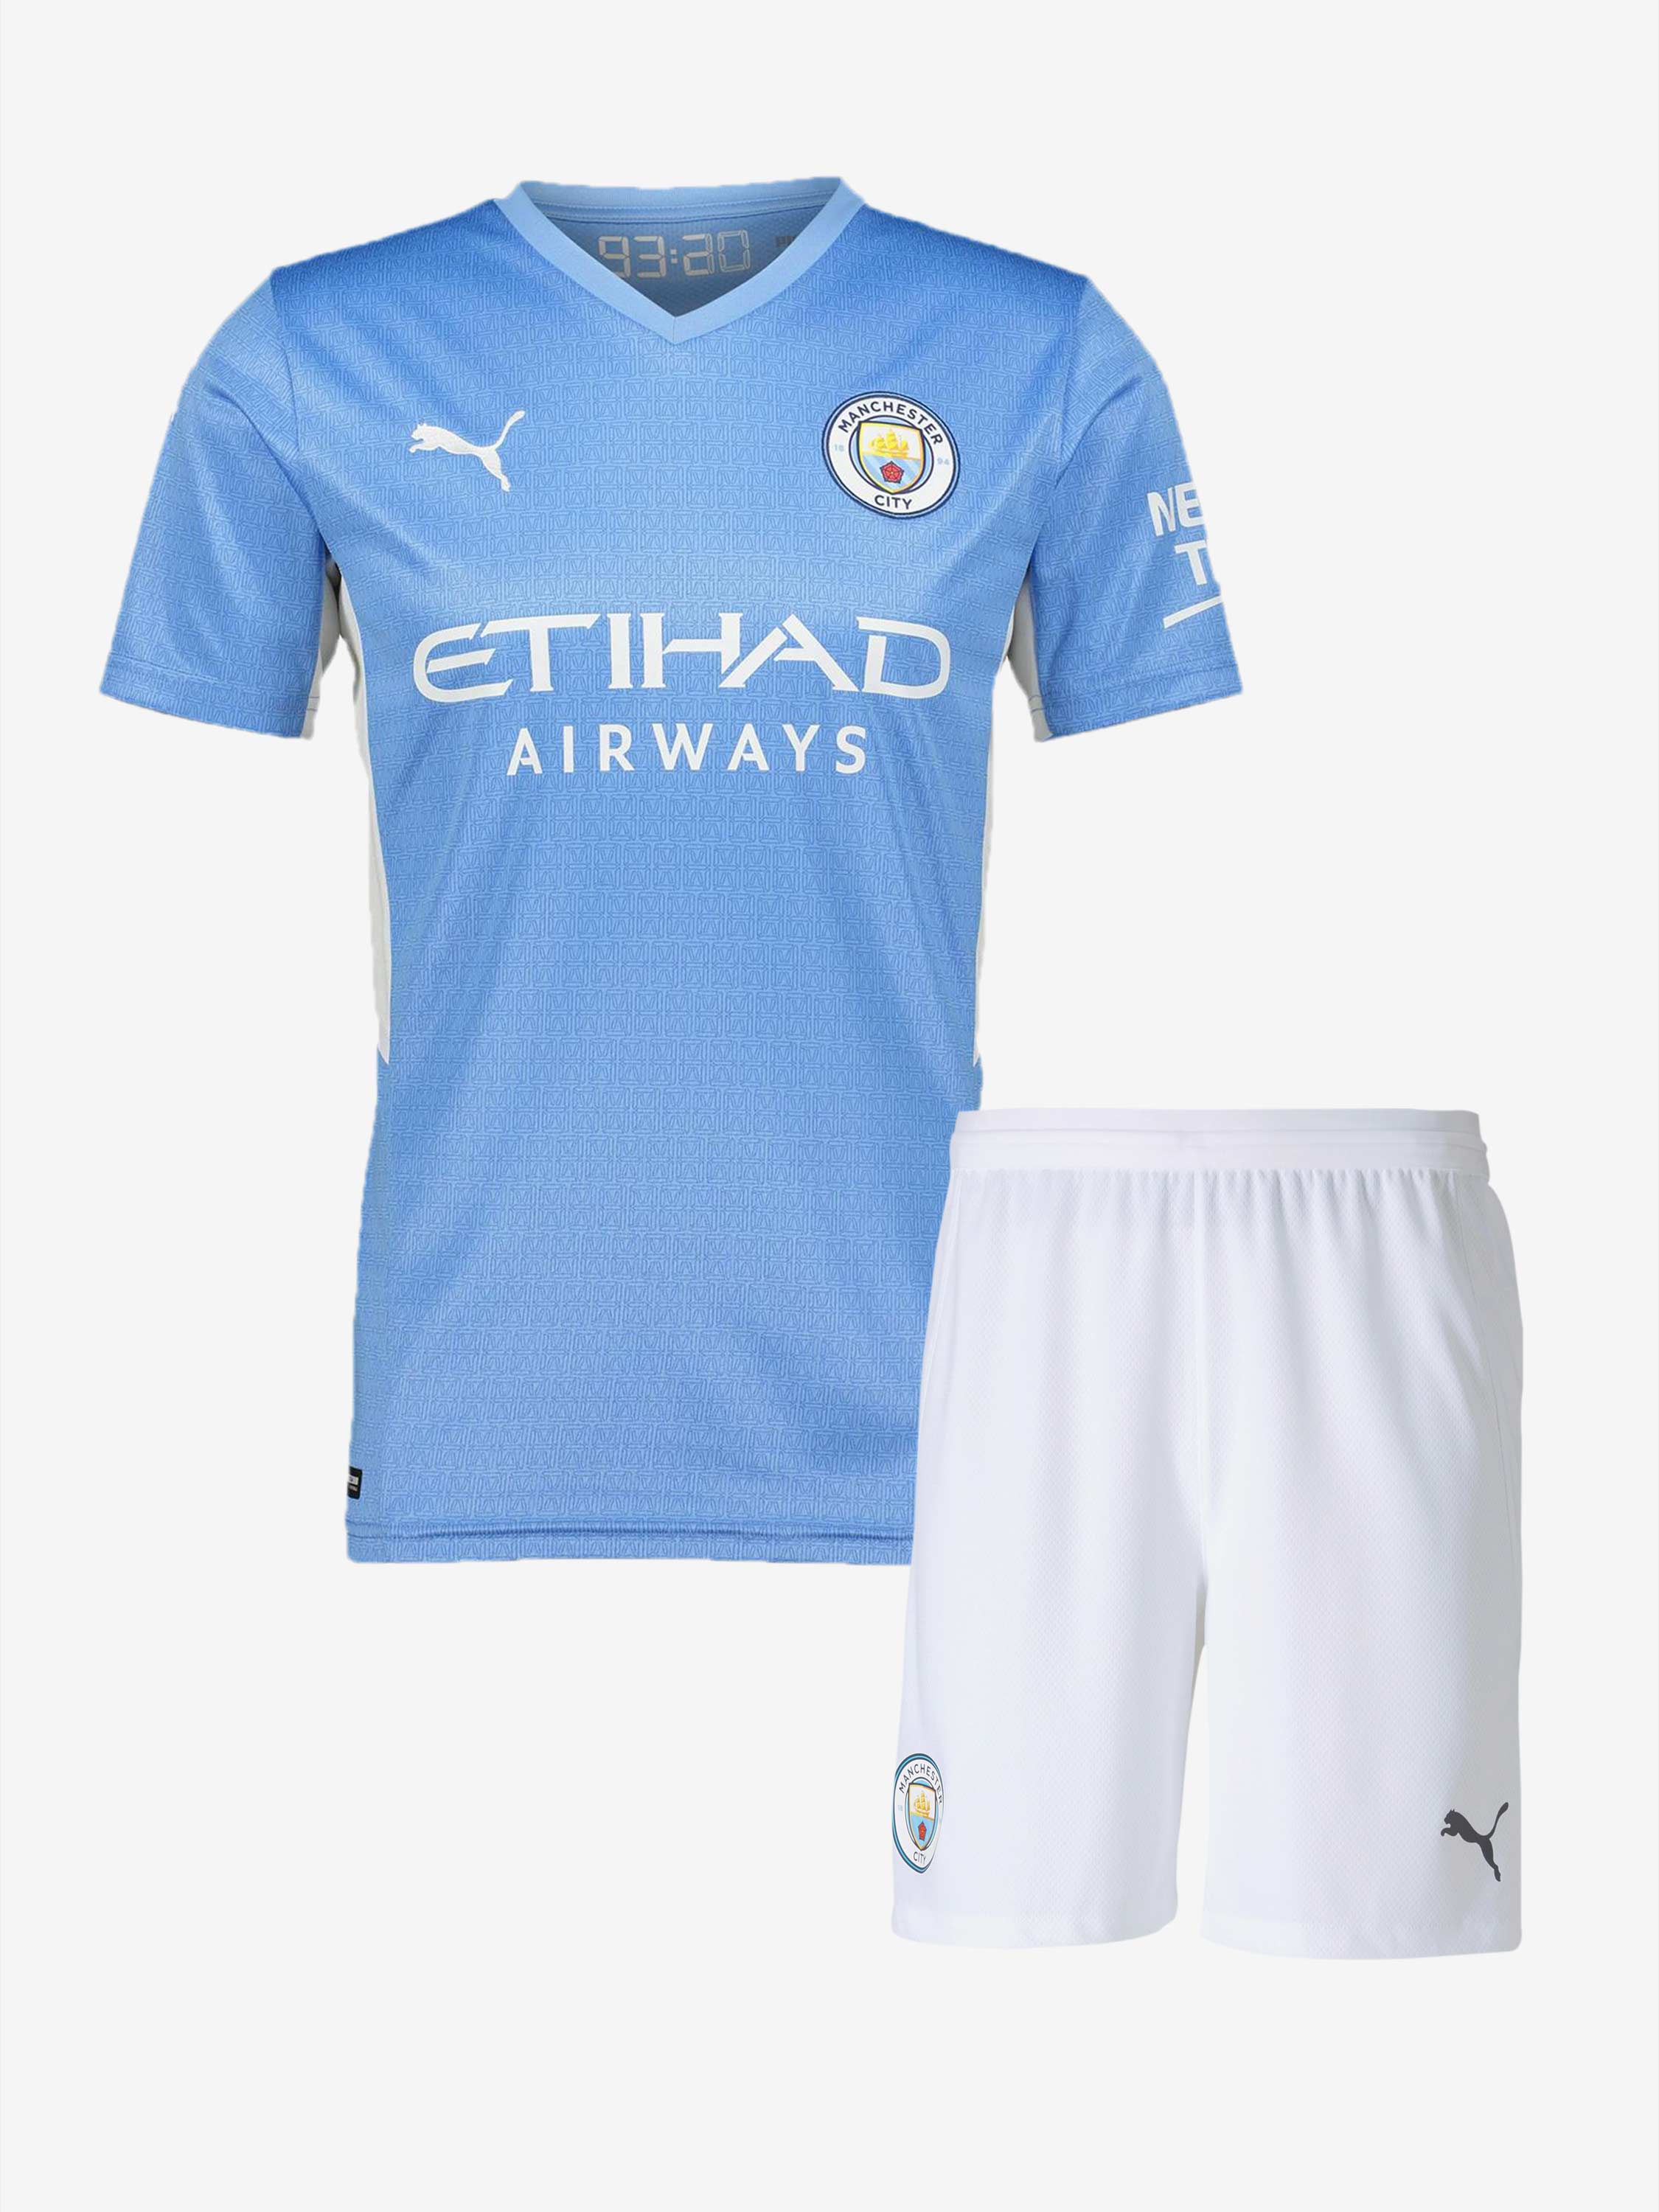 Manchester City FC 20/21 Home Football Shirt Size Medium Brand New With Tags. 